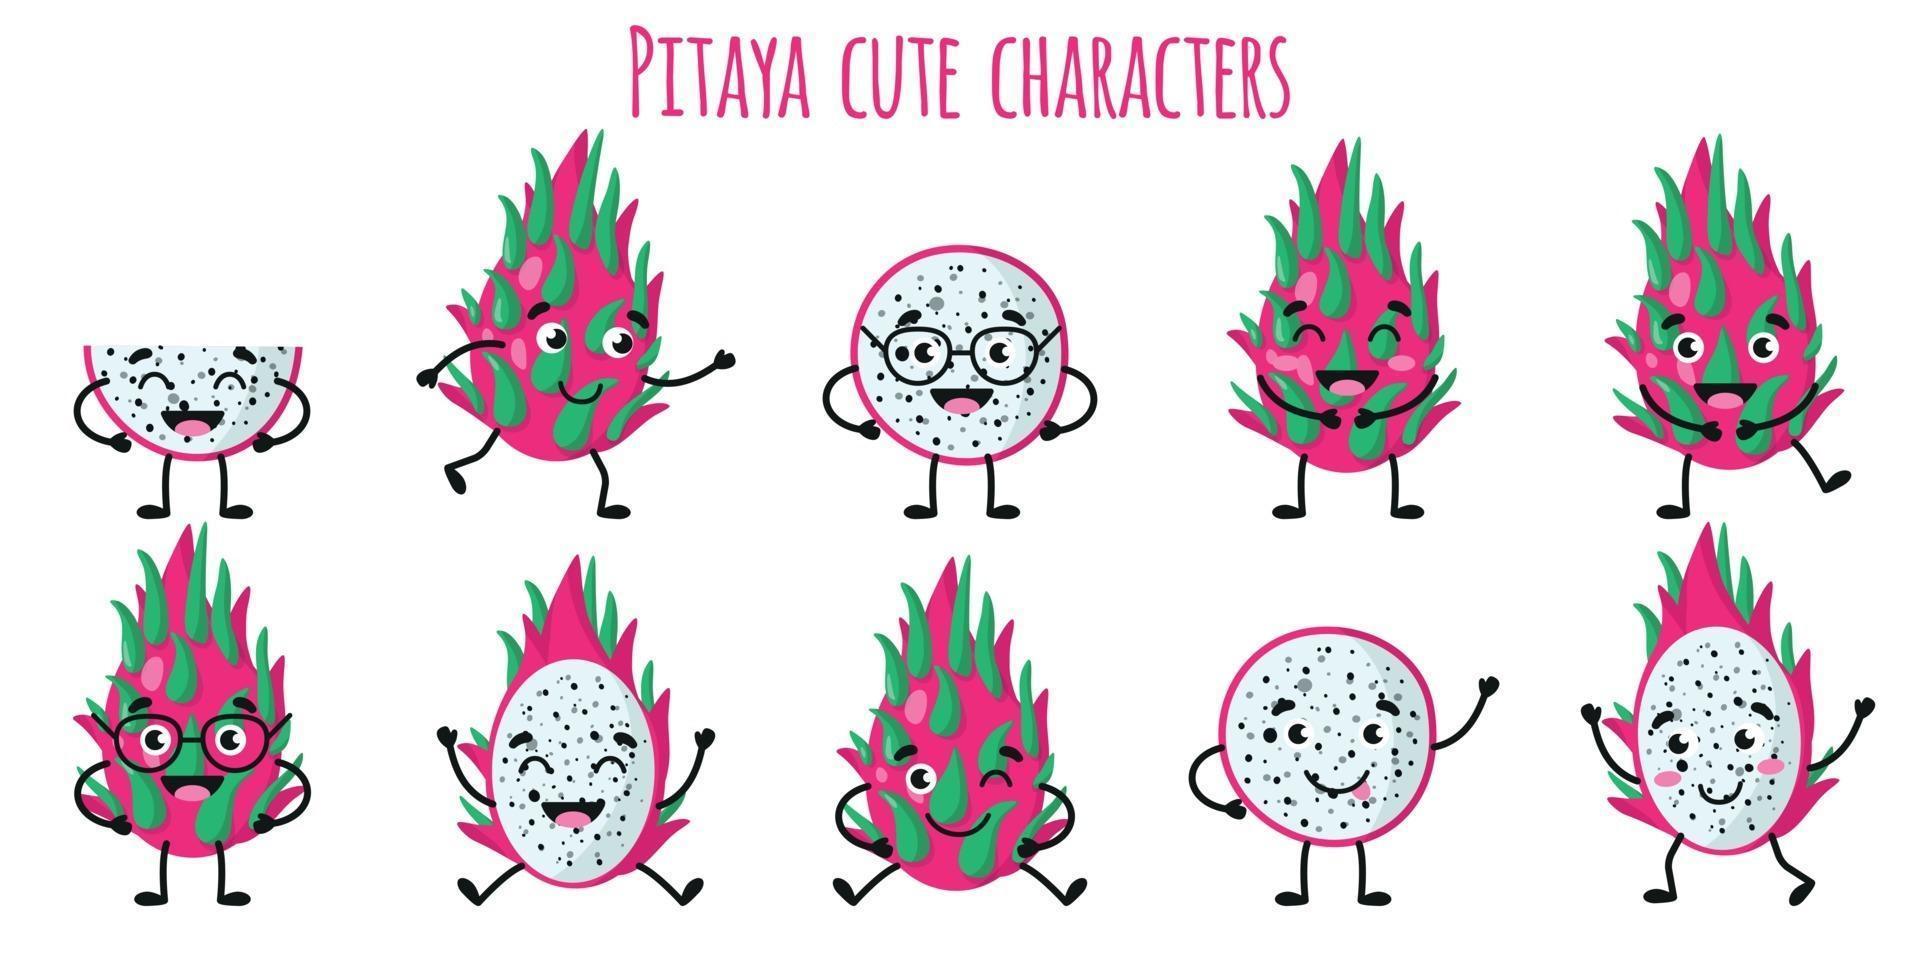 Pitaya fruit cute funny characters  with different emotions vector